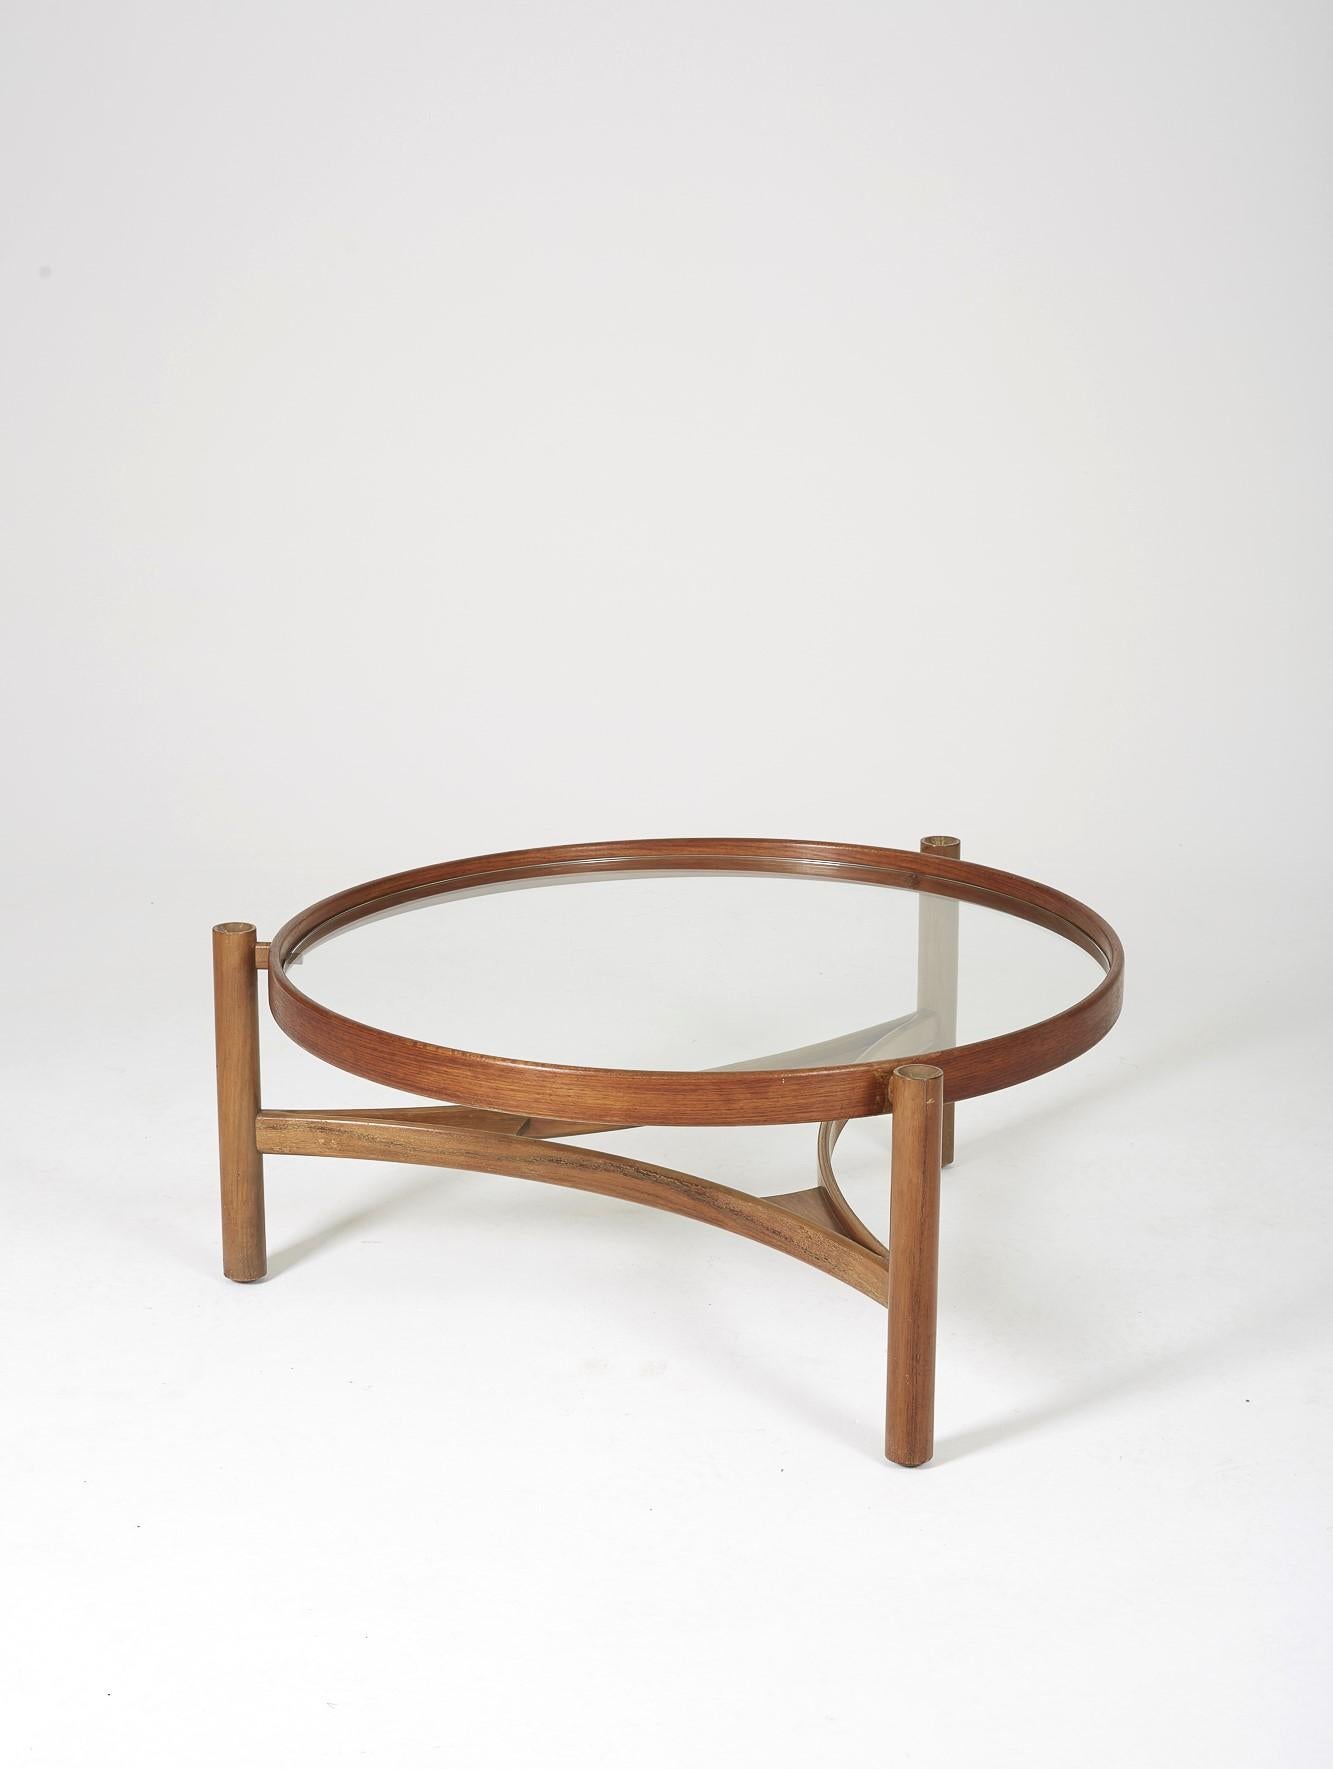 Round coffee table model 775 by Gianfranco Frattini for Cassina, Italy 1960s. Solid wood structure and glass top. Good condition, some scratches on the top.